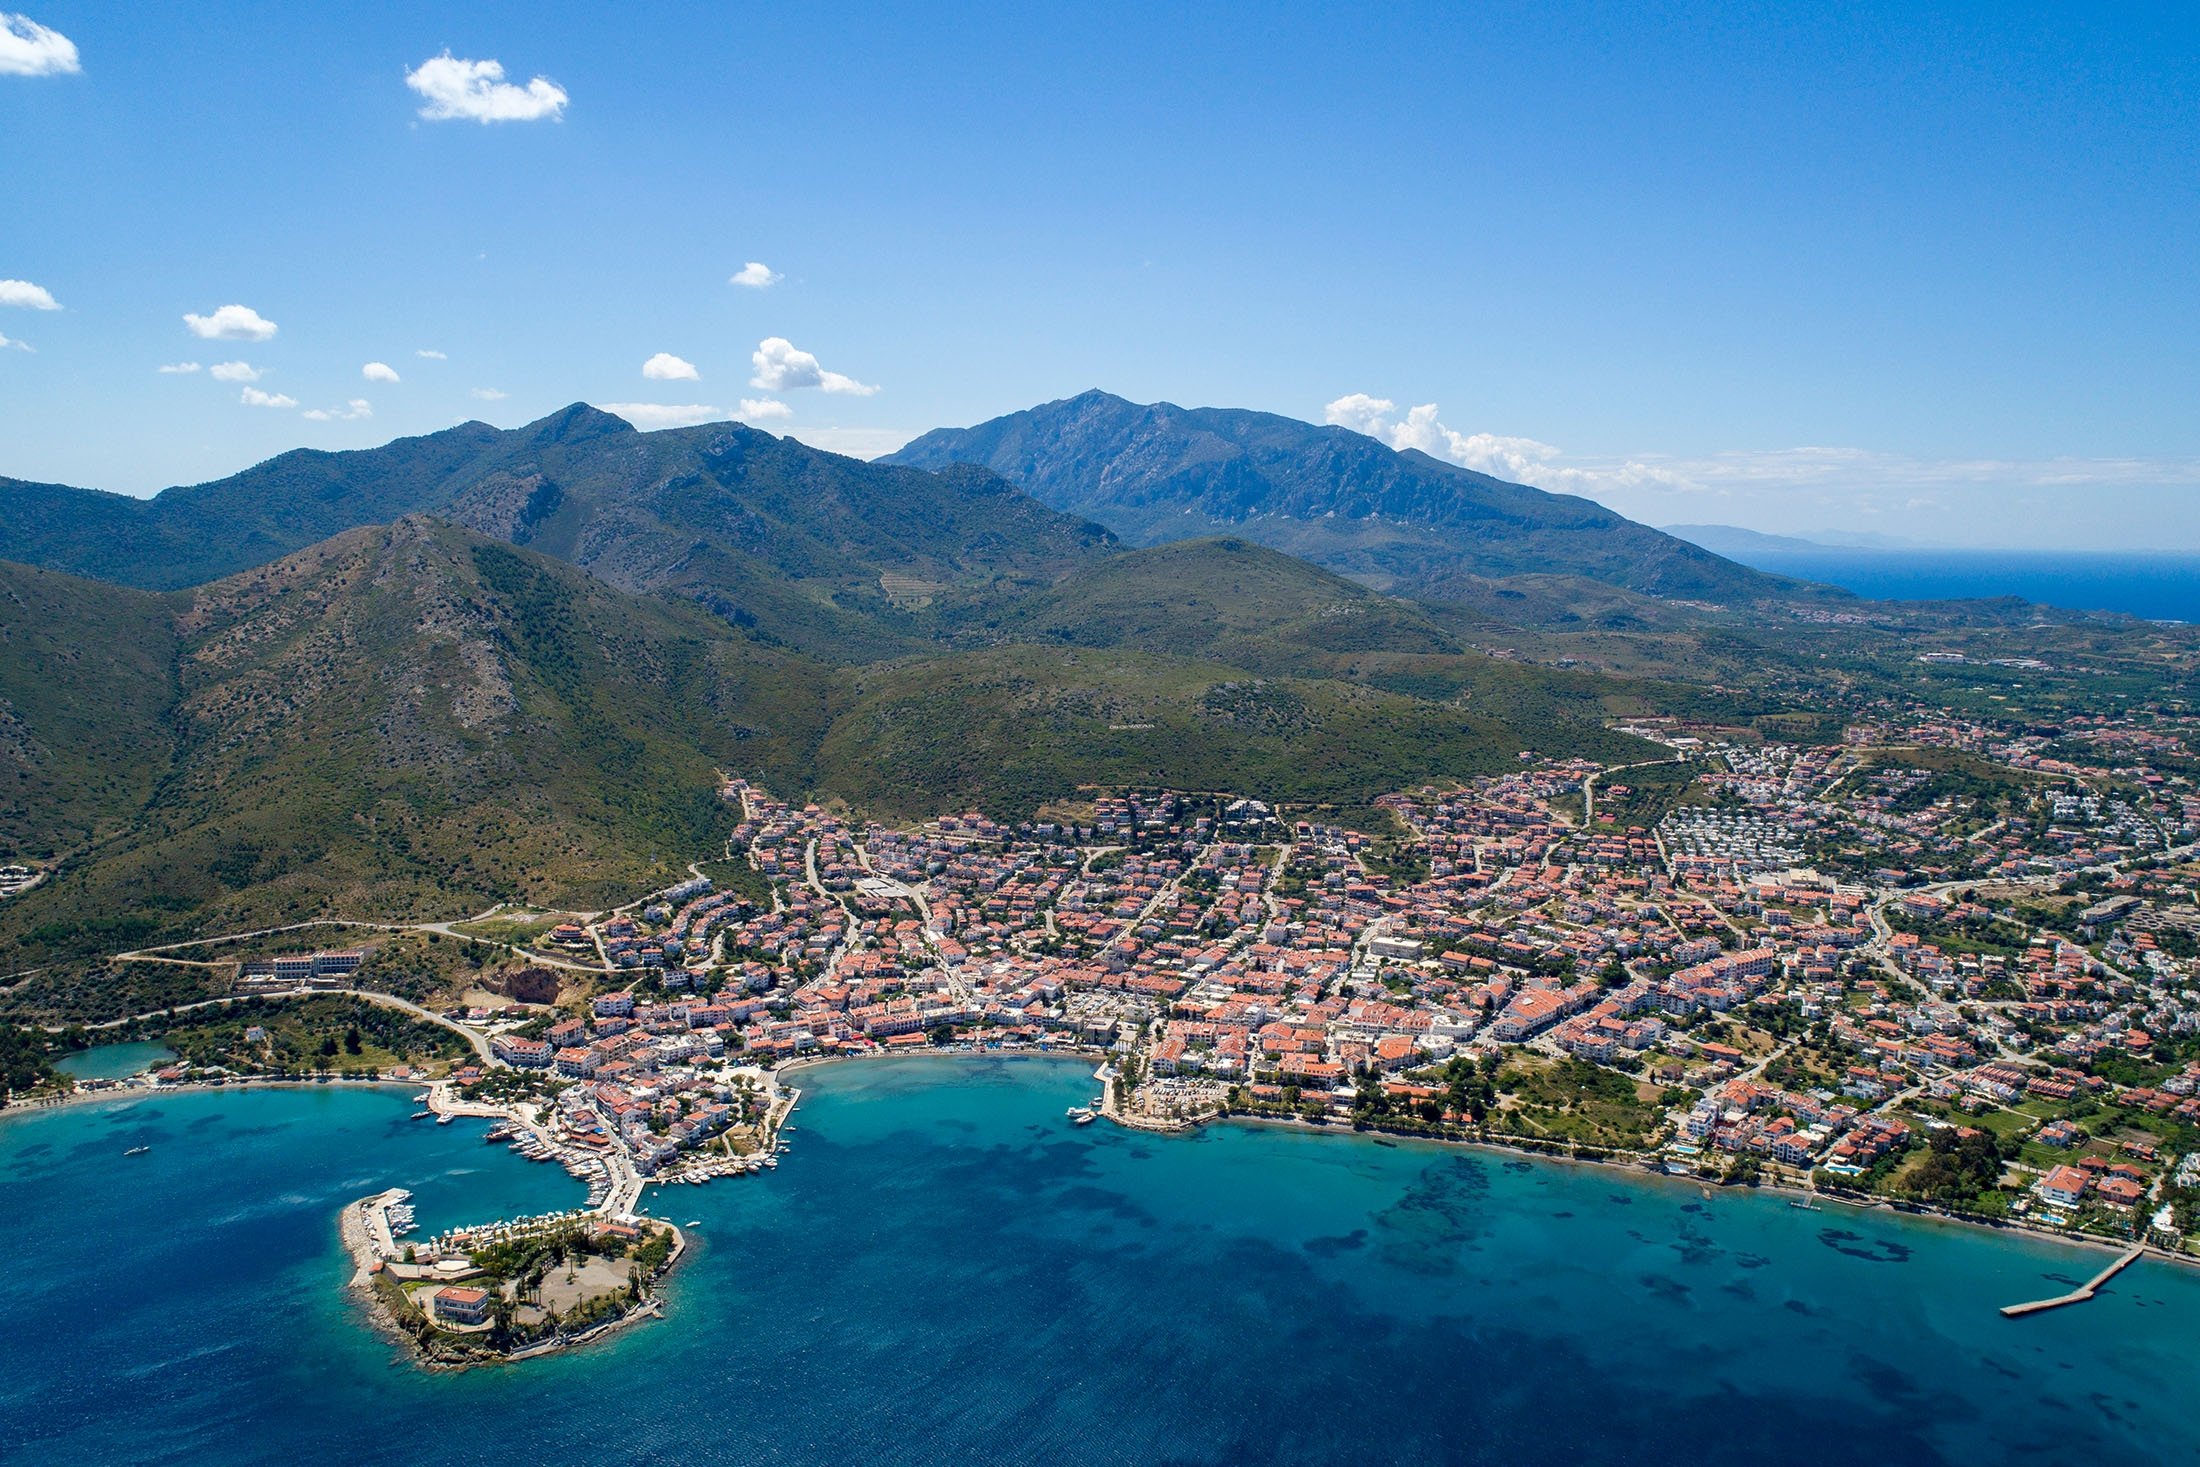 Muğla's Datça houses a dozen villages that are all inhabited by outsiders choosing to live in the spectacular natural setting of the region. (Shutterstock Photo)